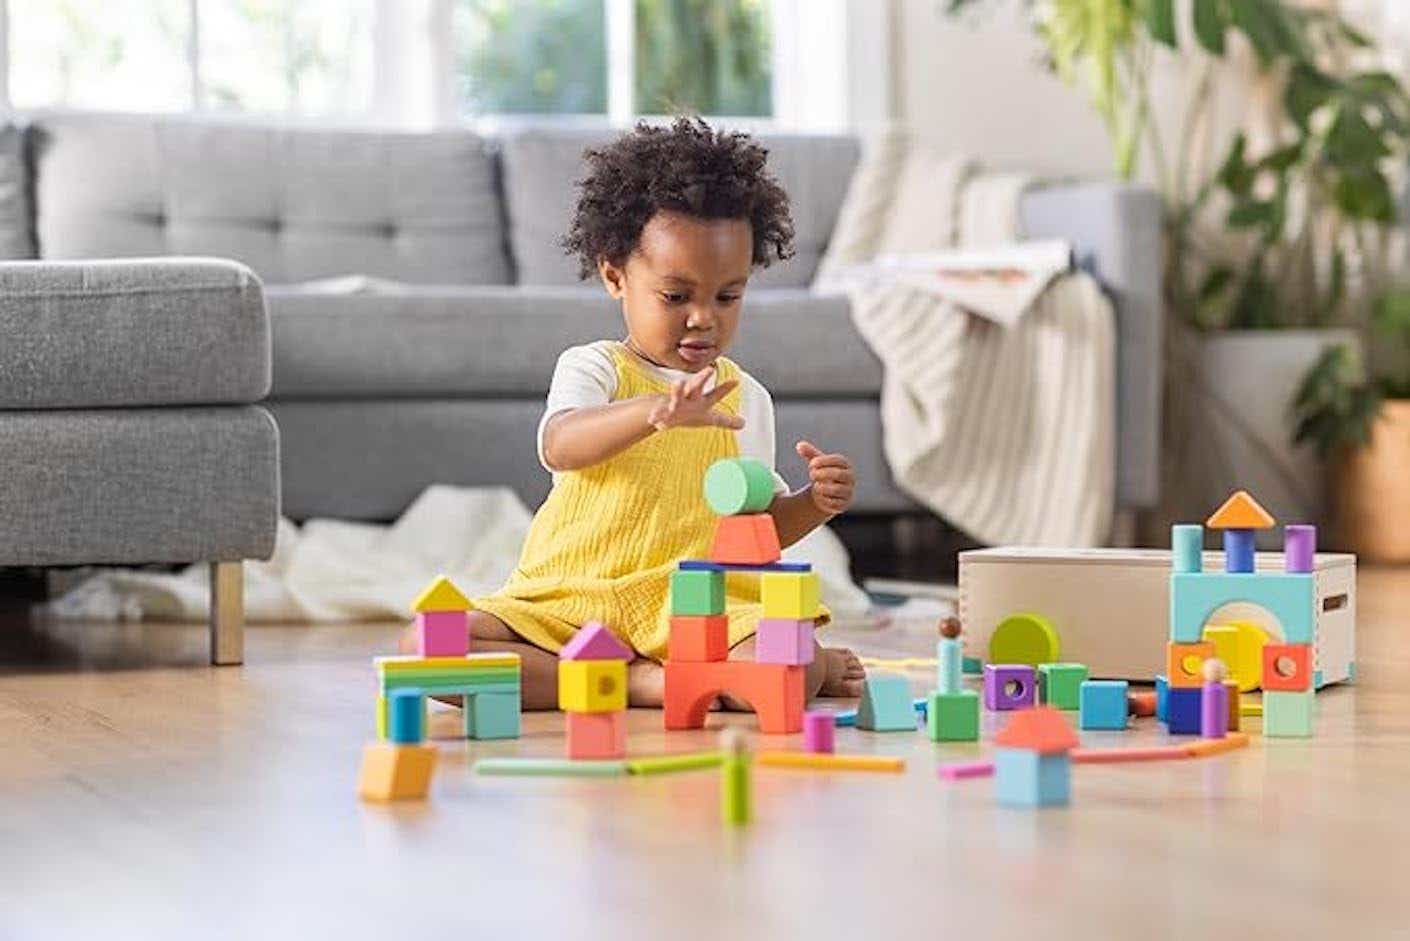 A toddler playing with blocks.